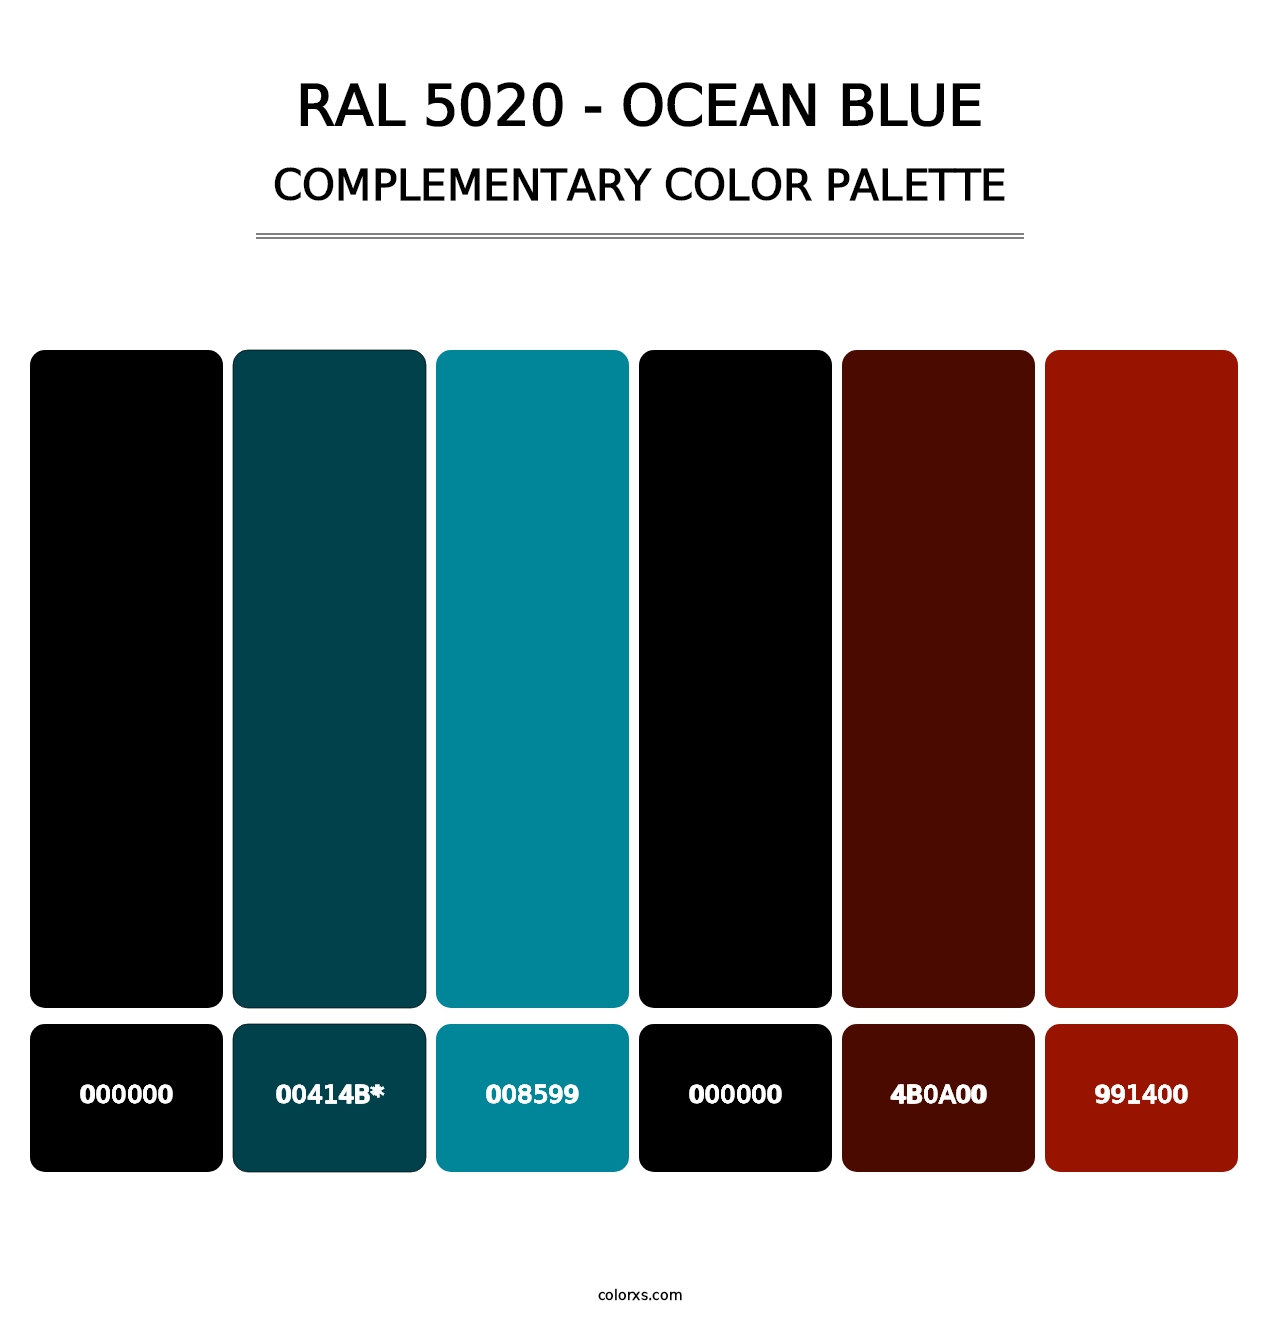 RAL 5020 - Ocean Blue - Complementary Color Palette